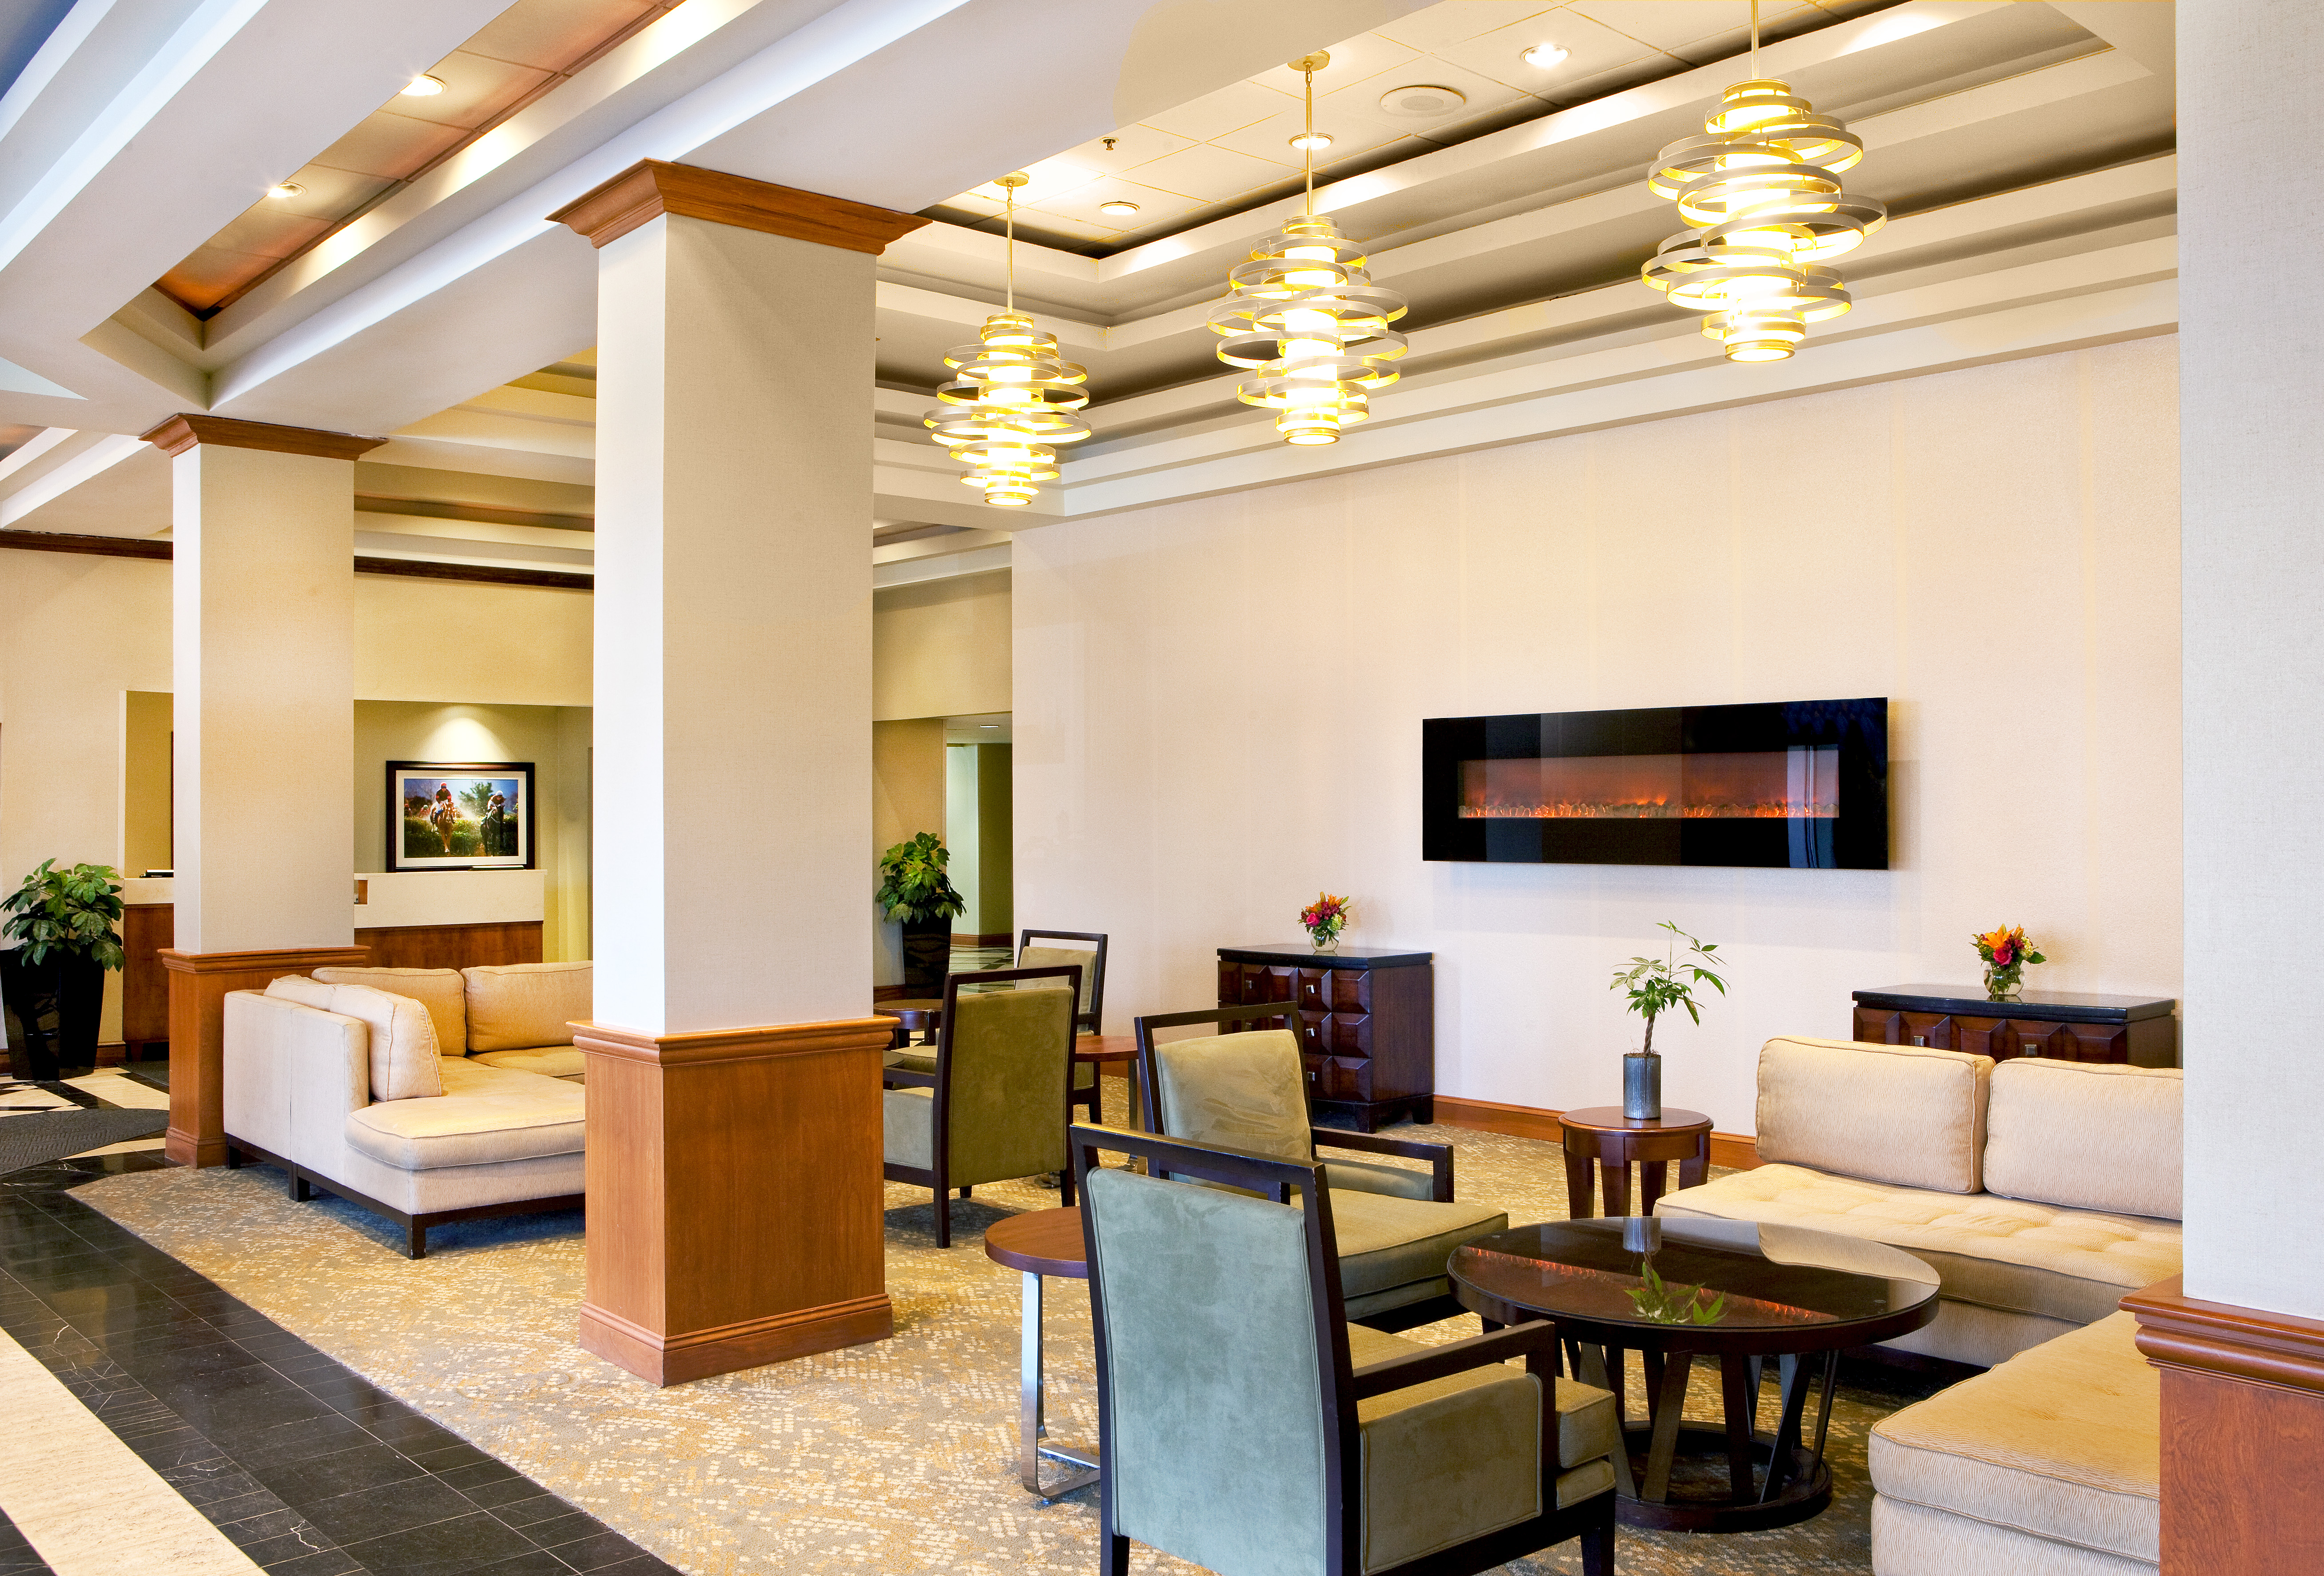 Wall Art, Tables and Mixed Seating Around Fireplace in Lobby Lounge Area